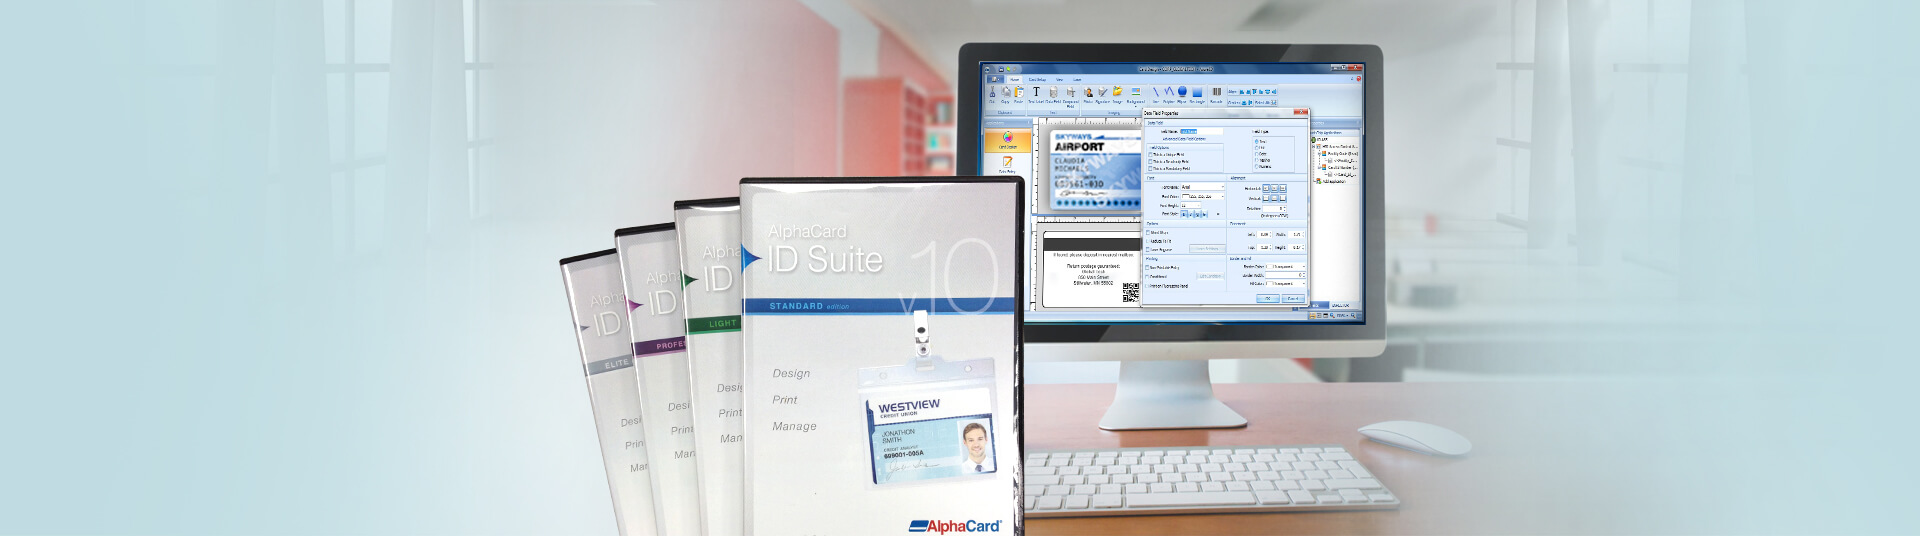 Identification Card Software Security